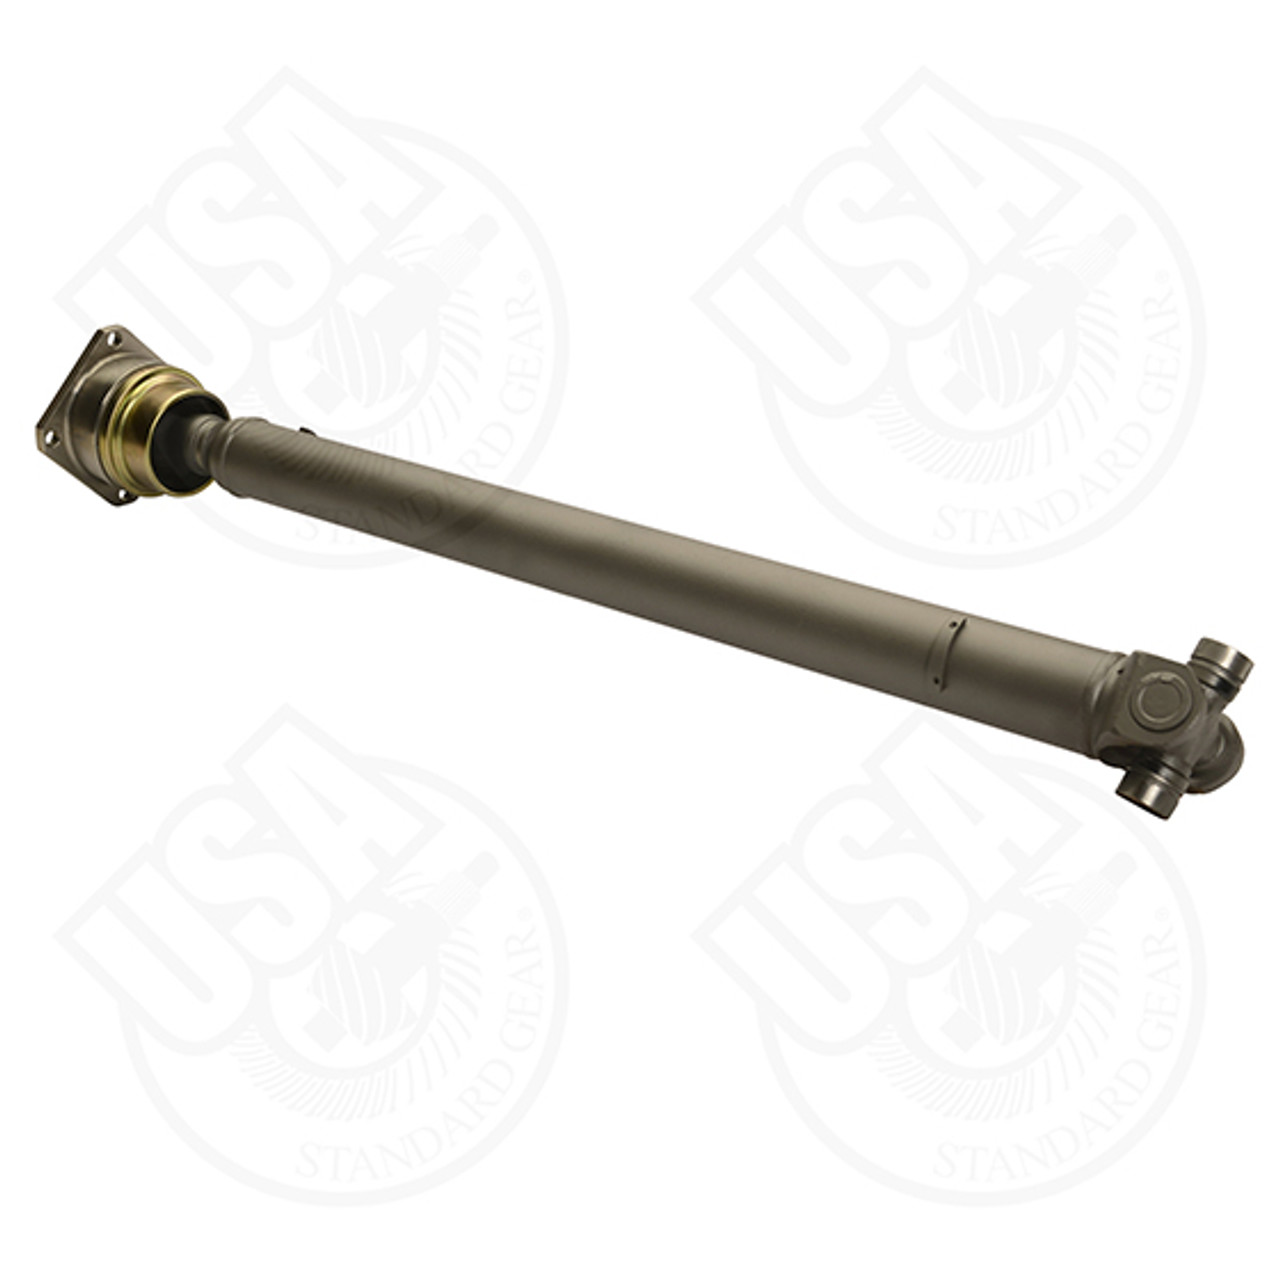 NEW USA Standard Front Driveshaft for Hummer H3, 23-5/8" Weld to Weld